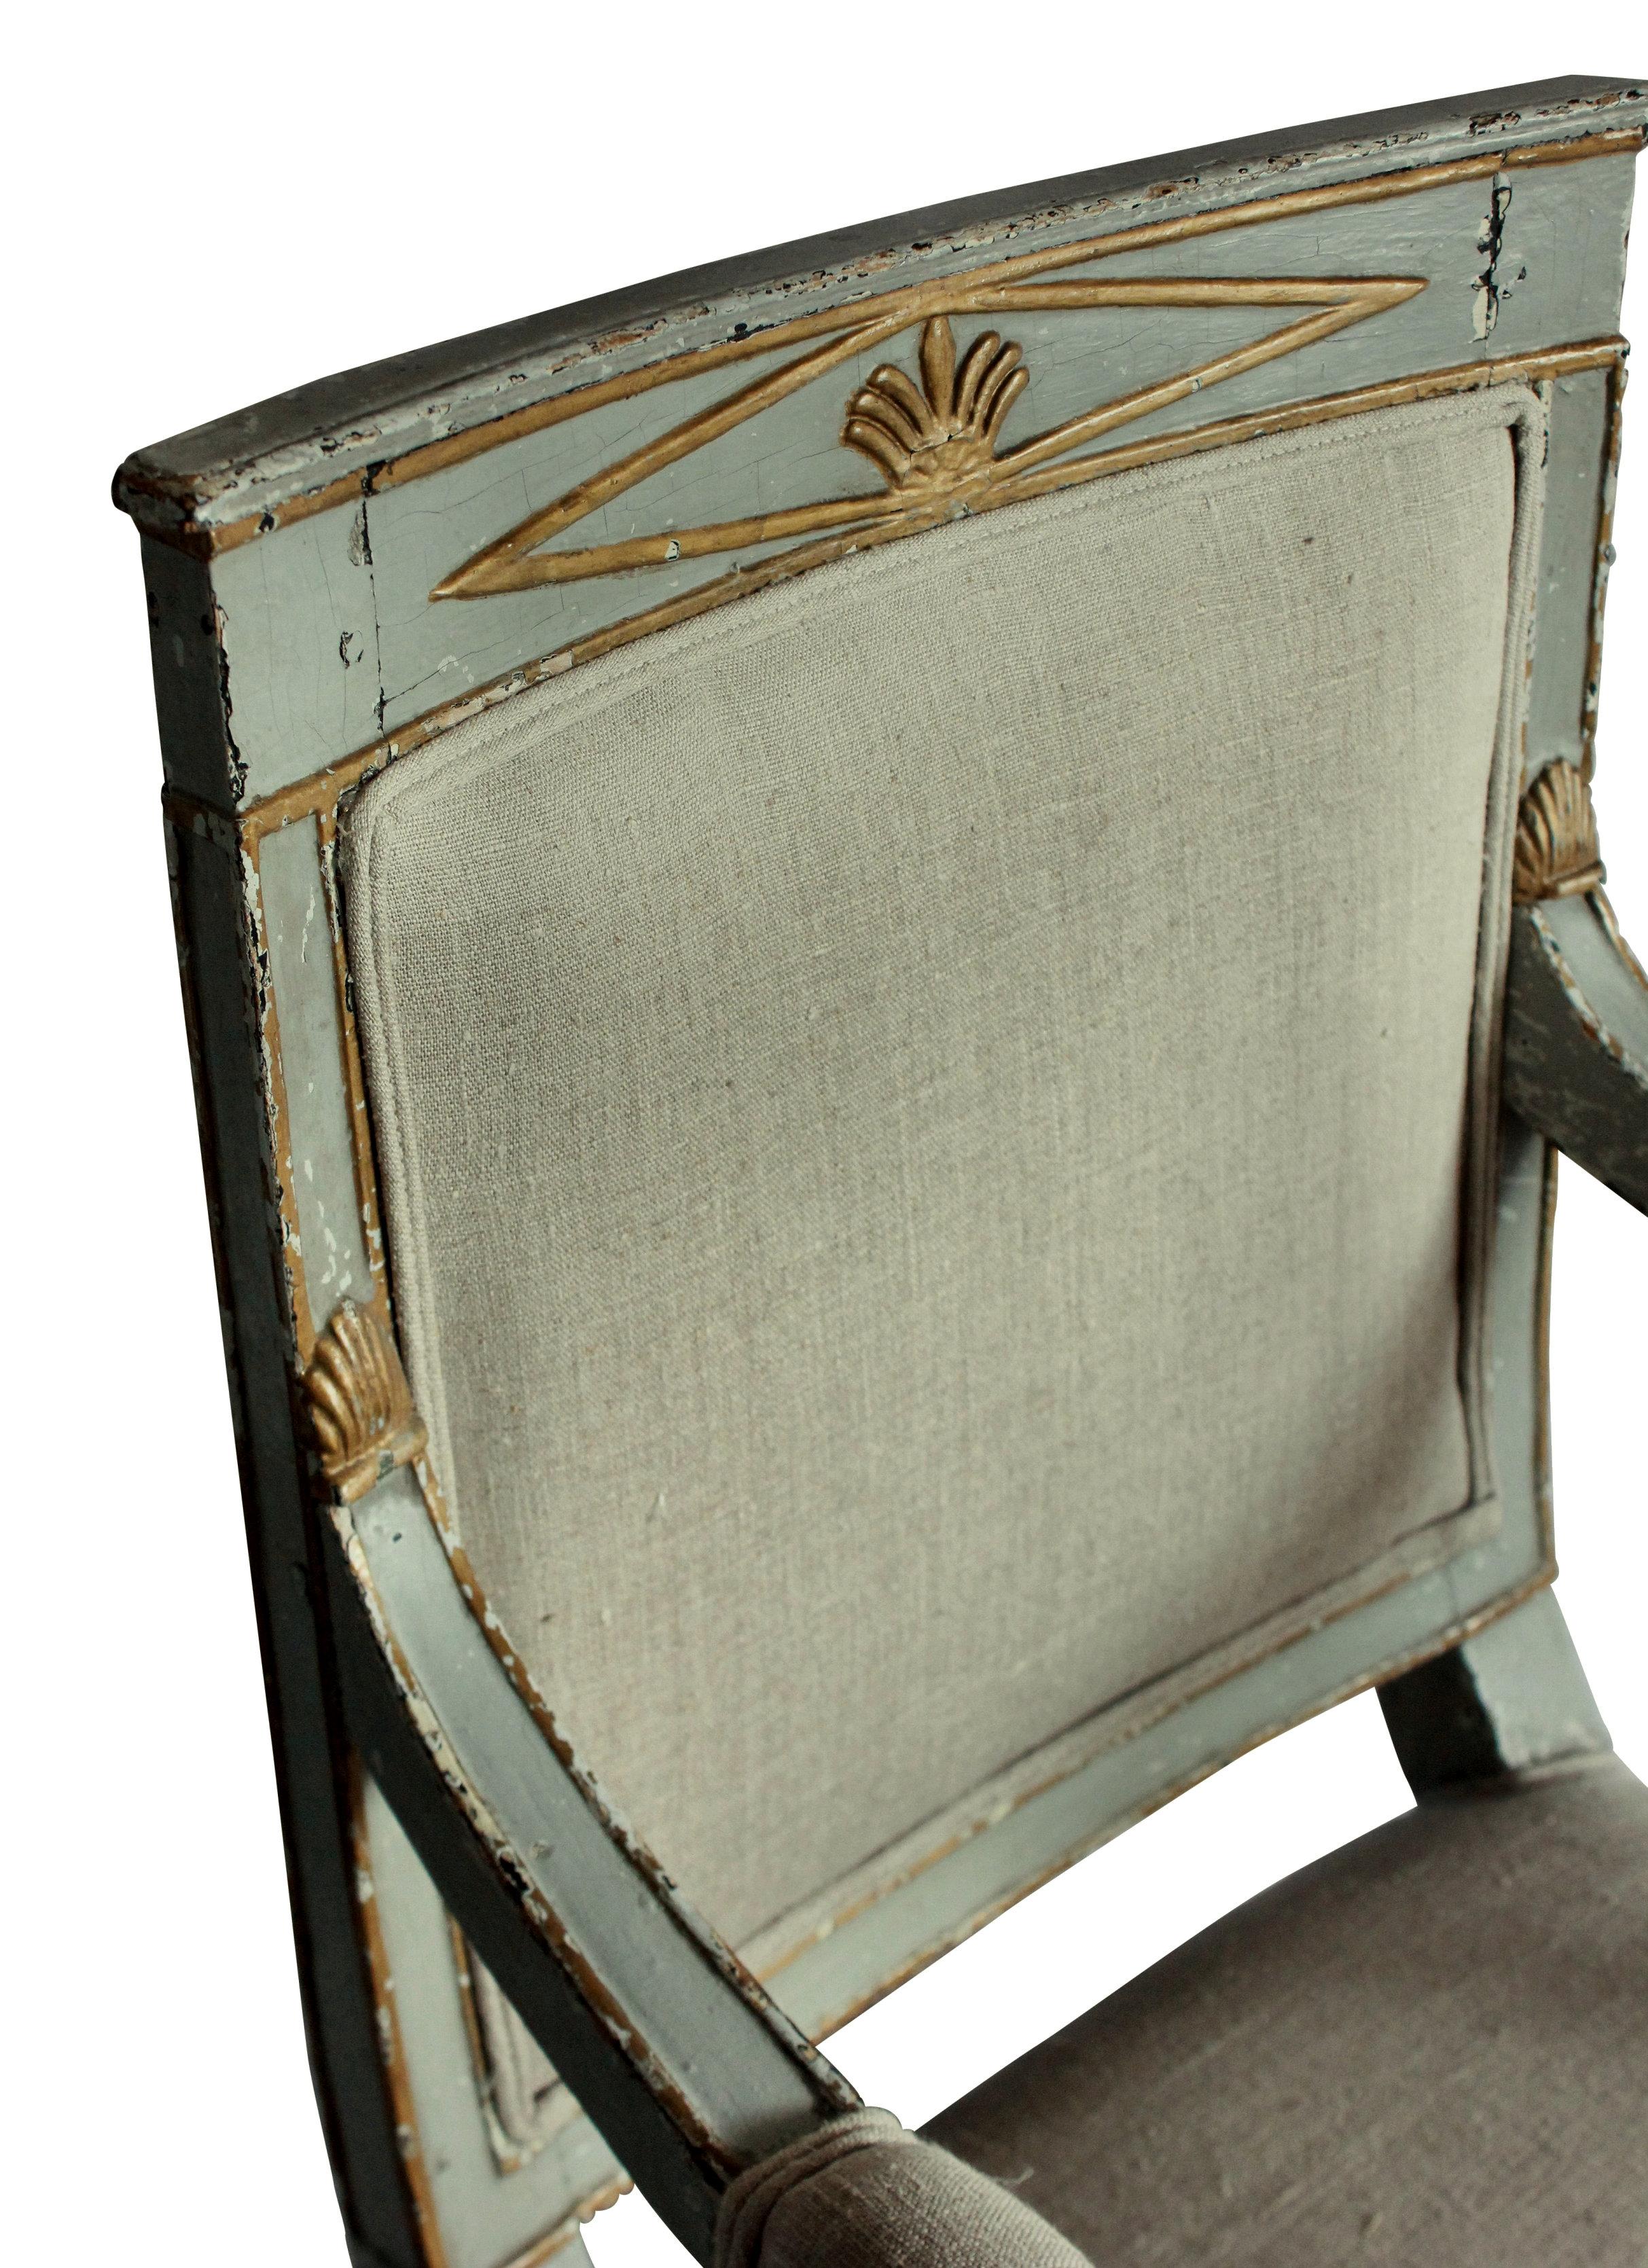 An early 19th century Swedish desk chair with original paints in a duck egg grey. Upholstered in linen and horse hair.